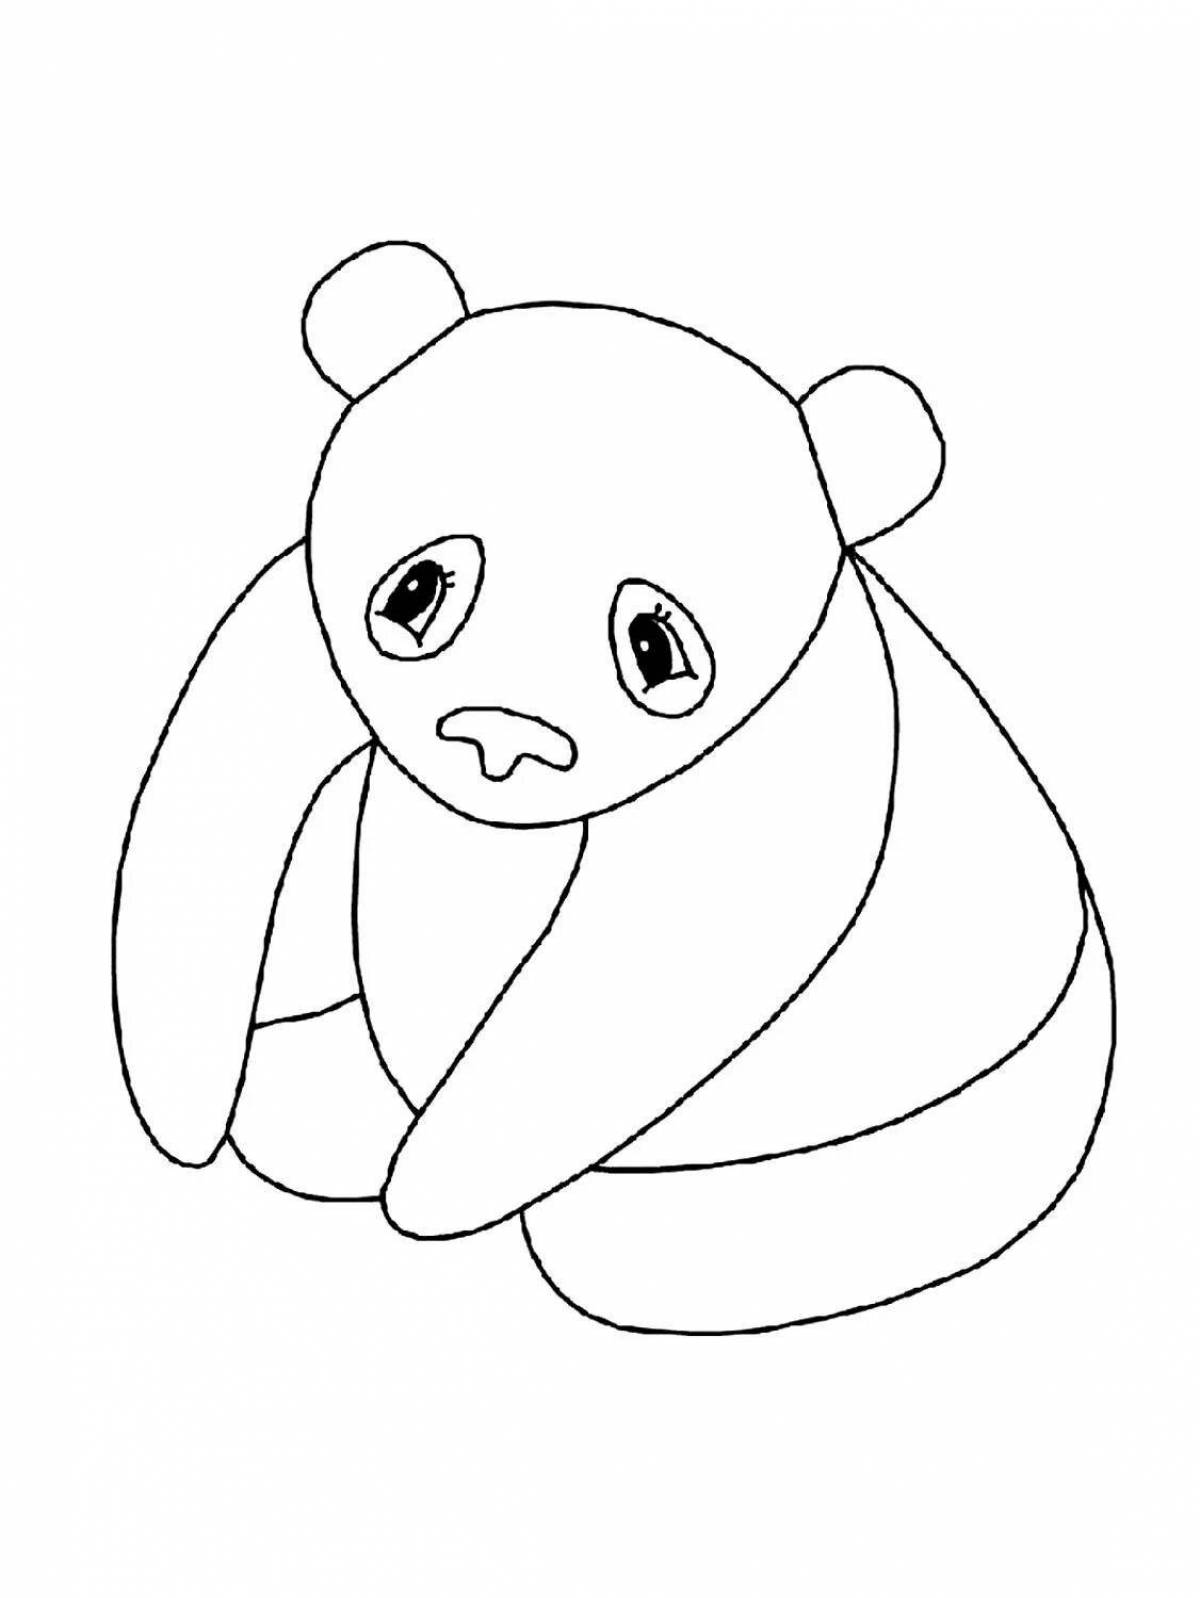 Colorful panda coloring pages for kids